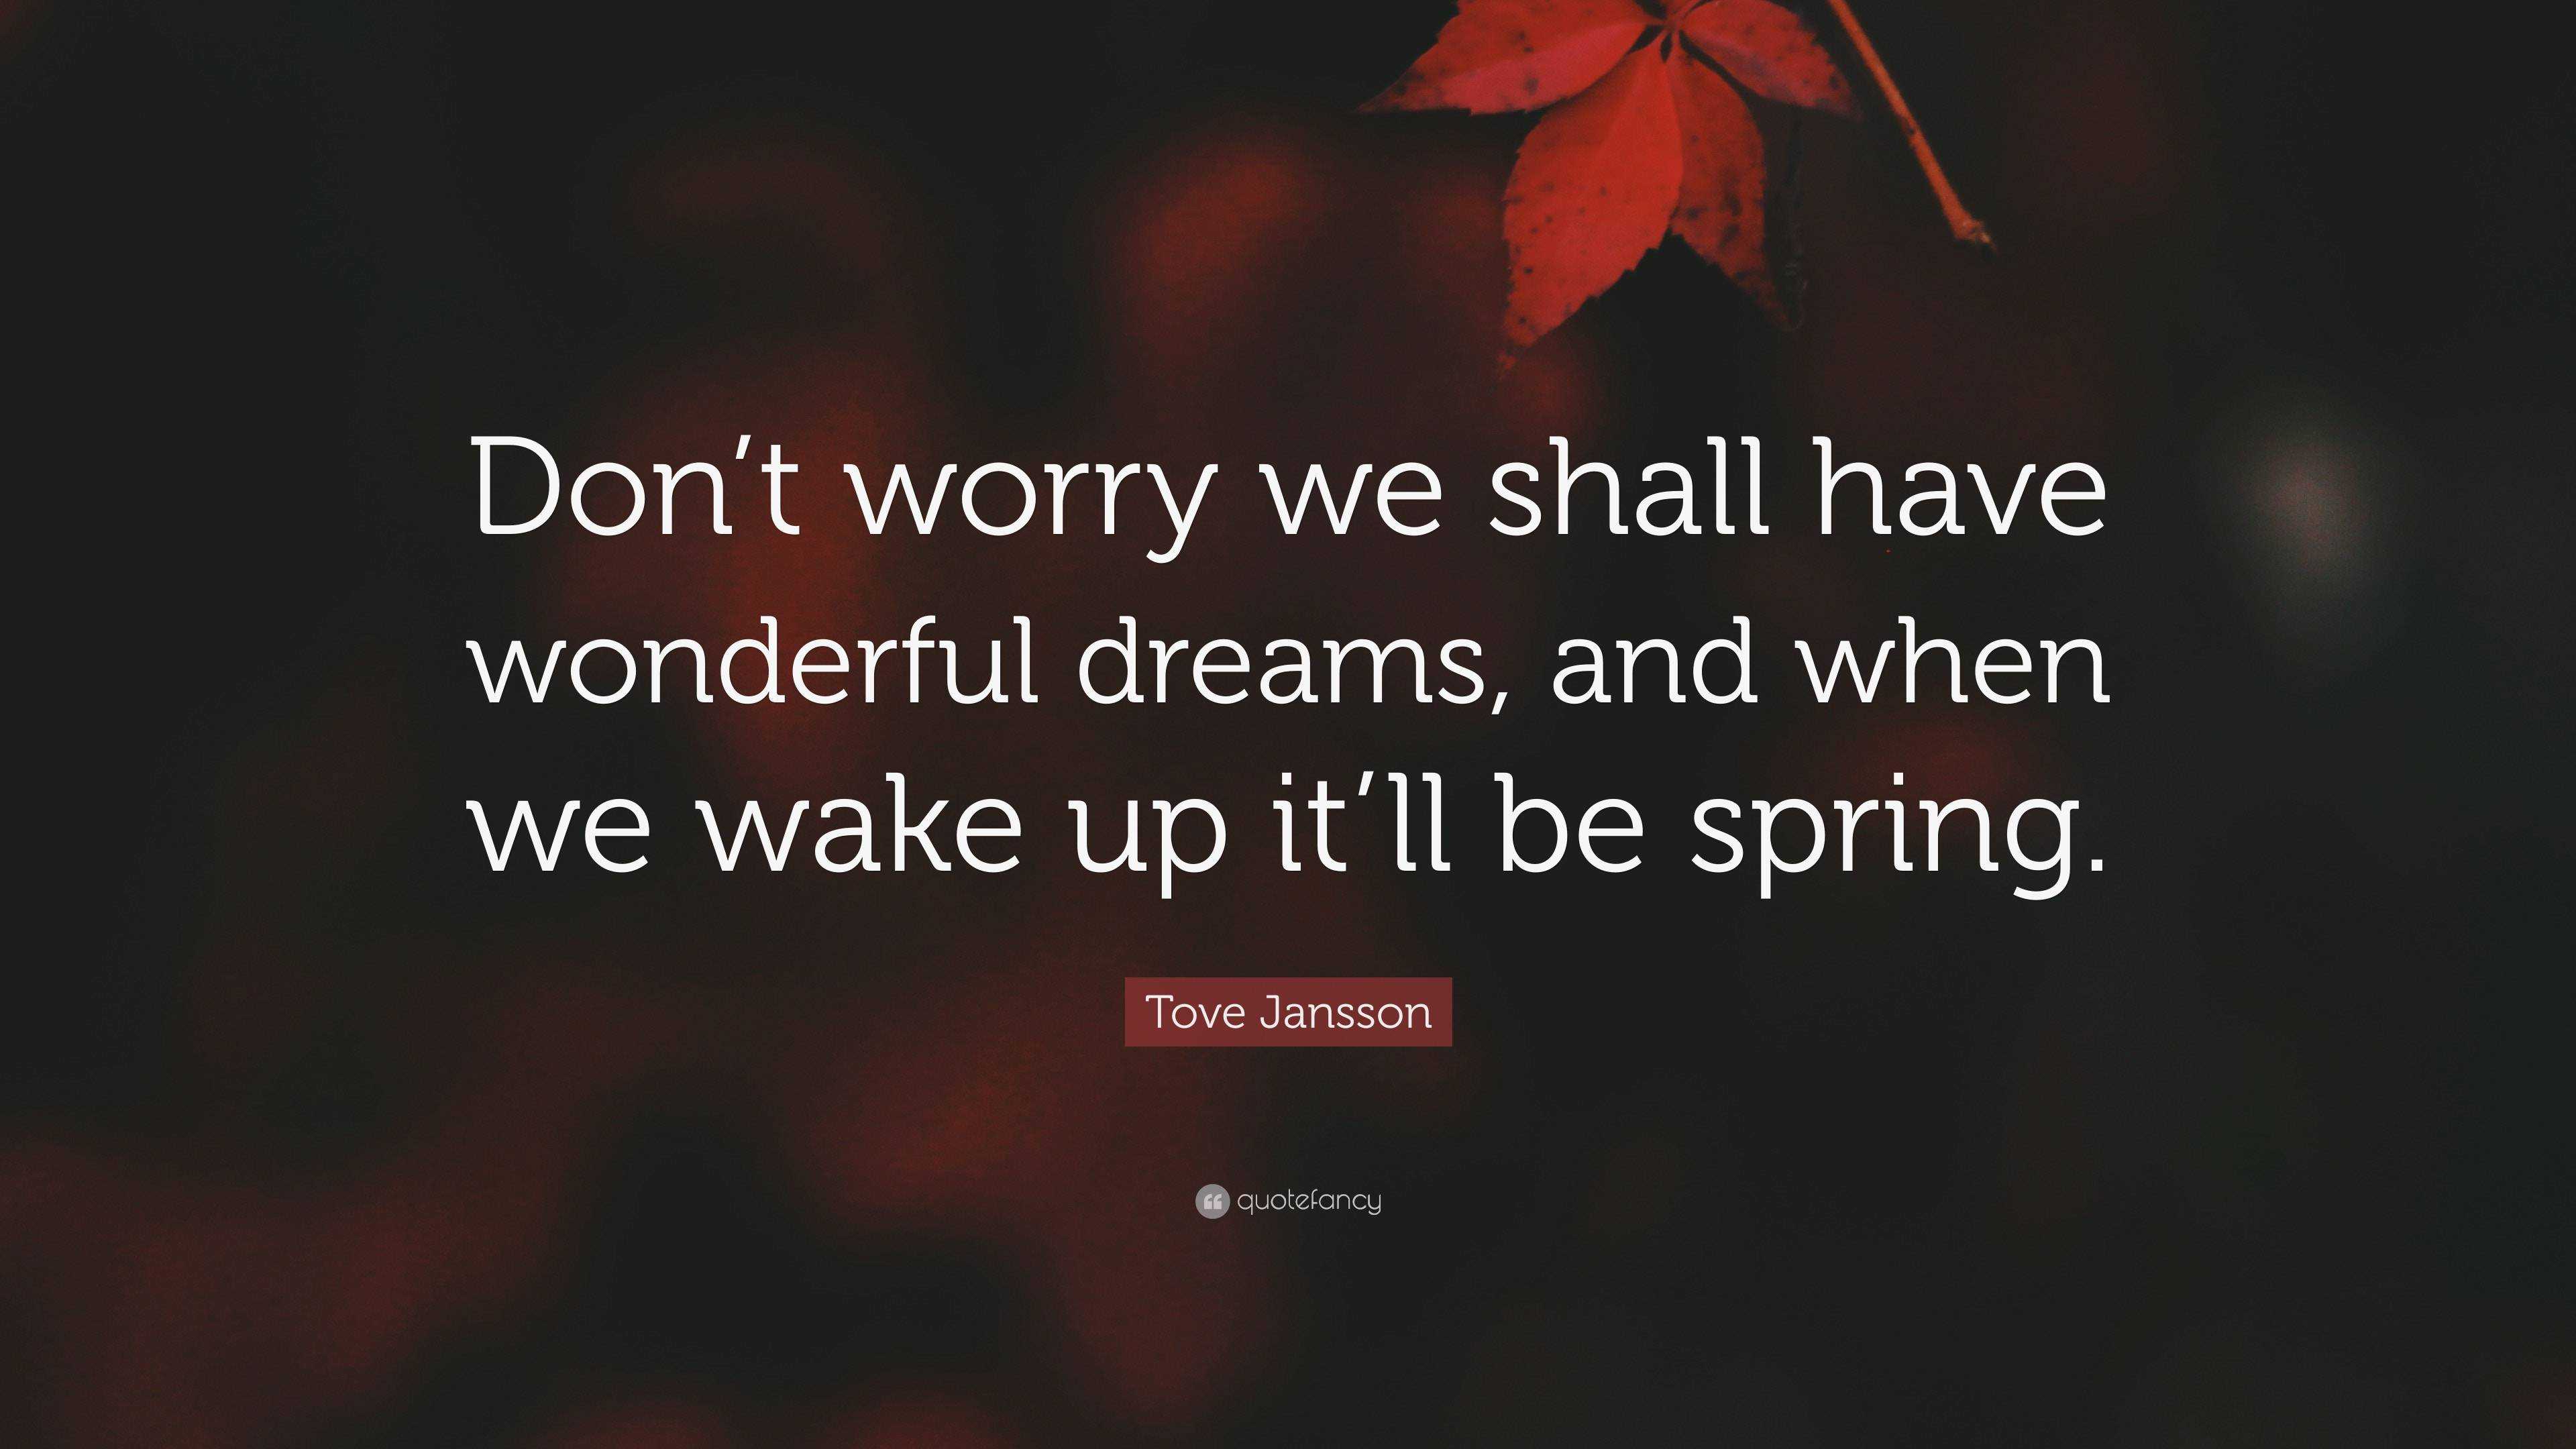 Tove Jansson Quote: “Don’t worry we shall have wonderful dreams, and ...